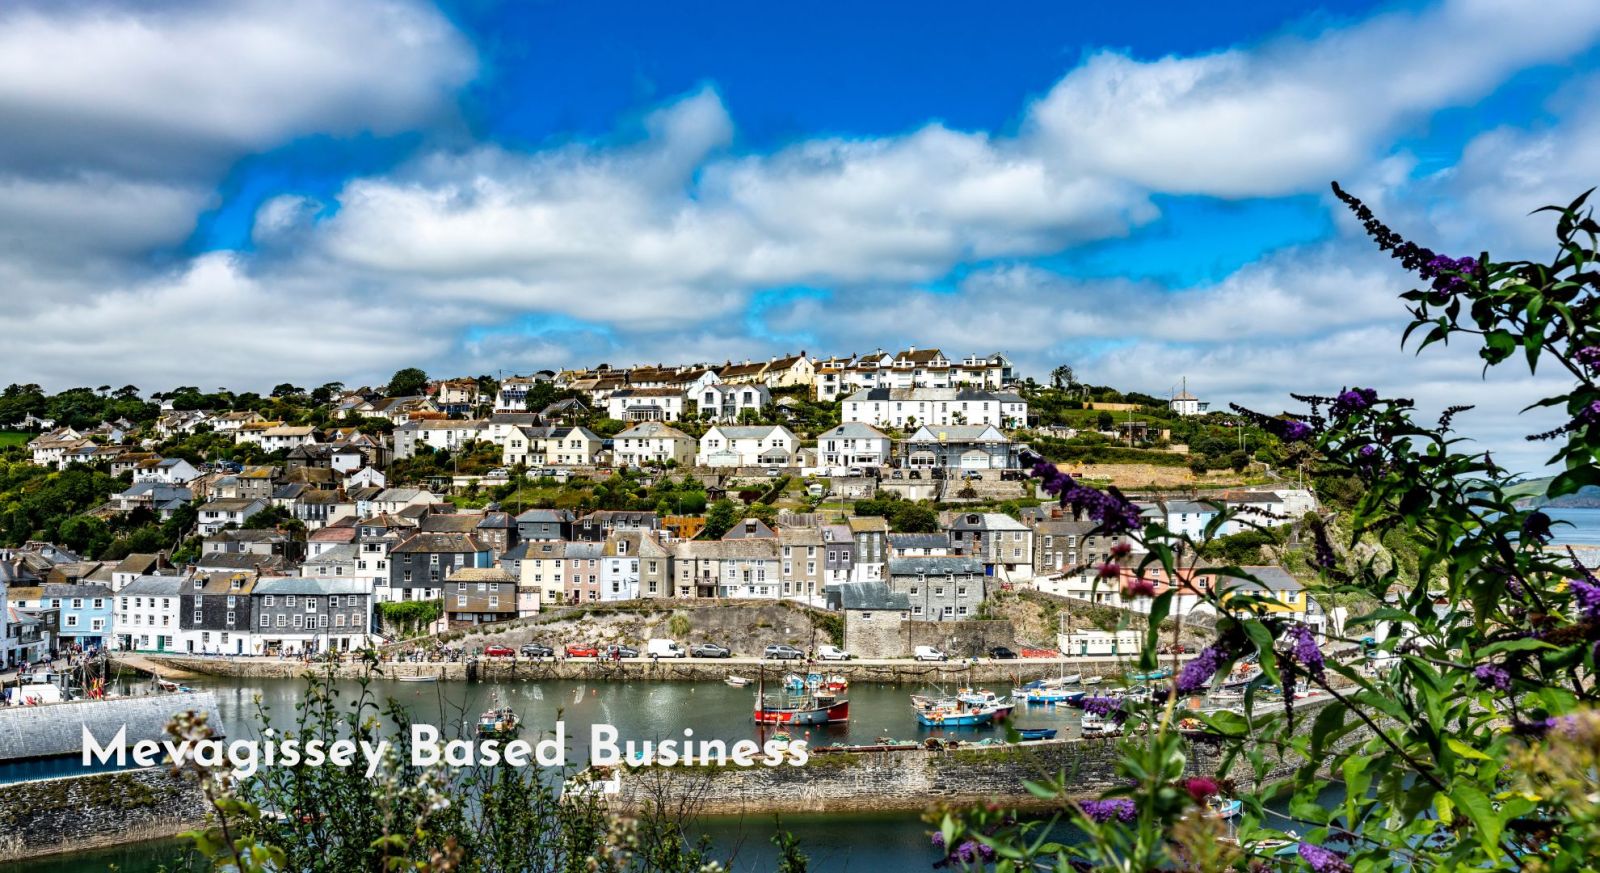 Mevagissey based business. Mapping Your Travel. Travel Agency